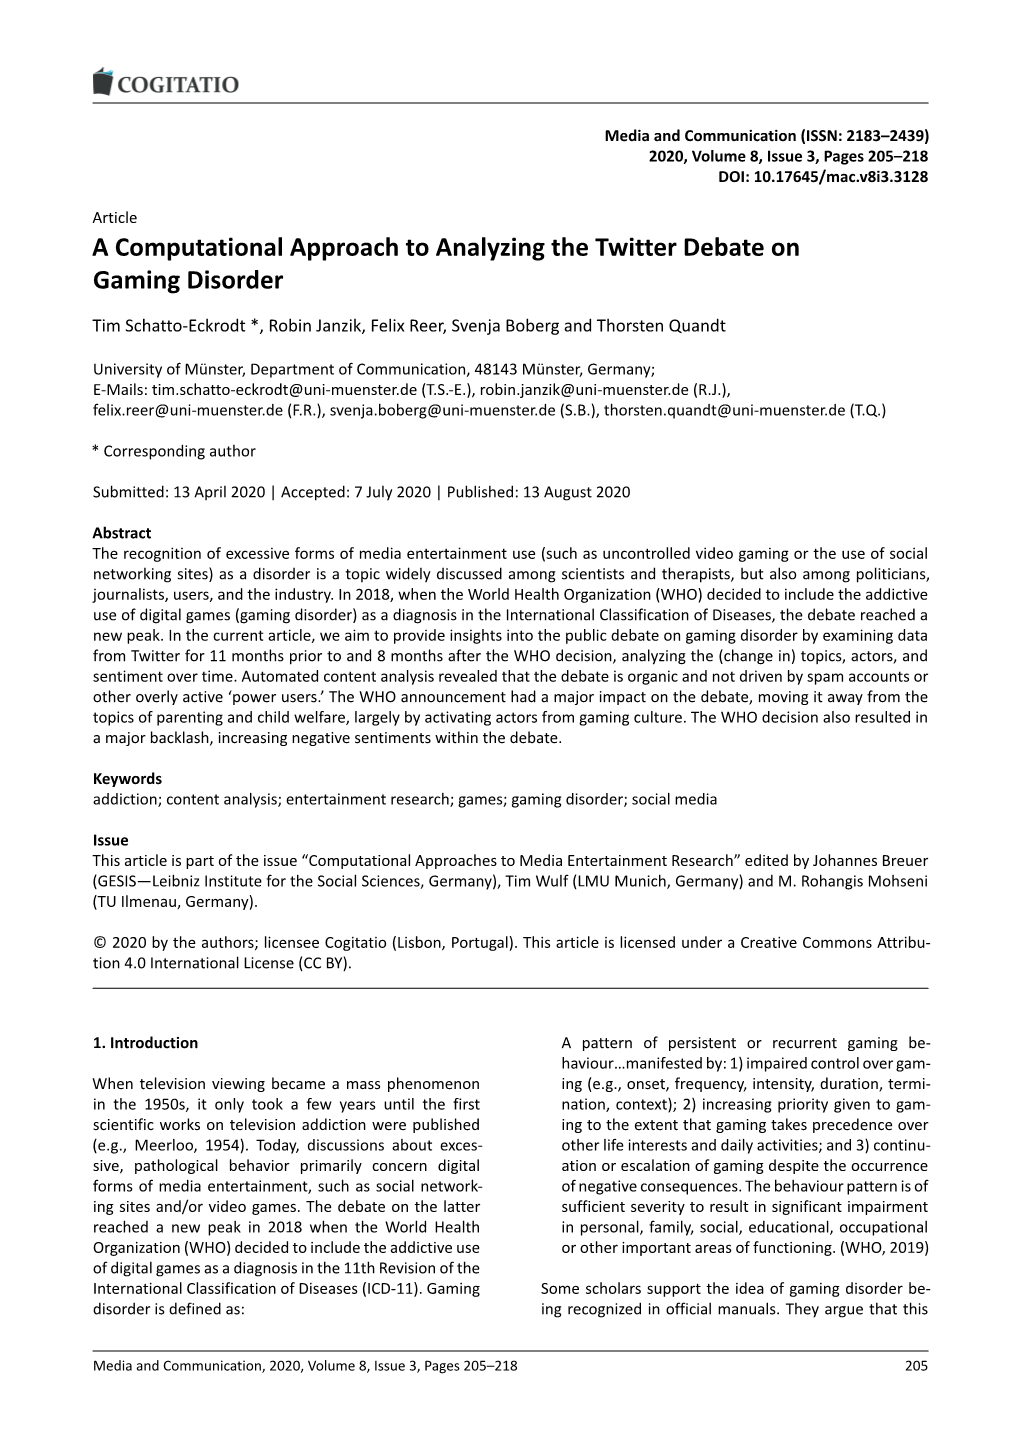 A Computational Approach to Analyzing the Twitter Debate on Gaming Disorder